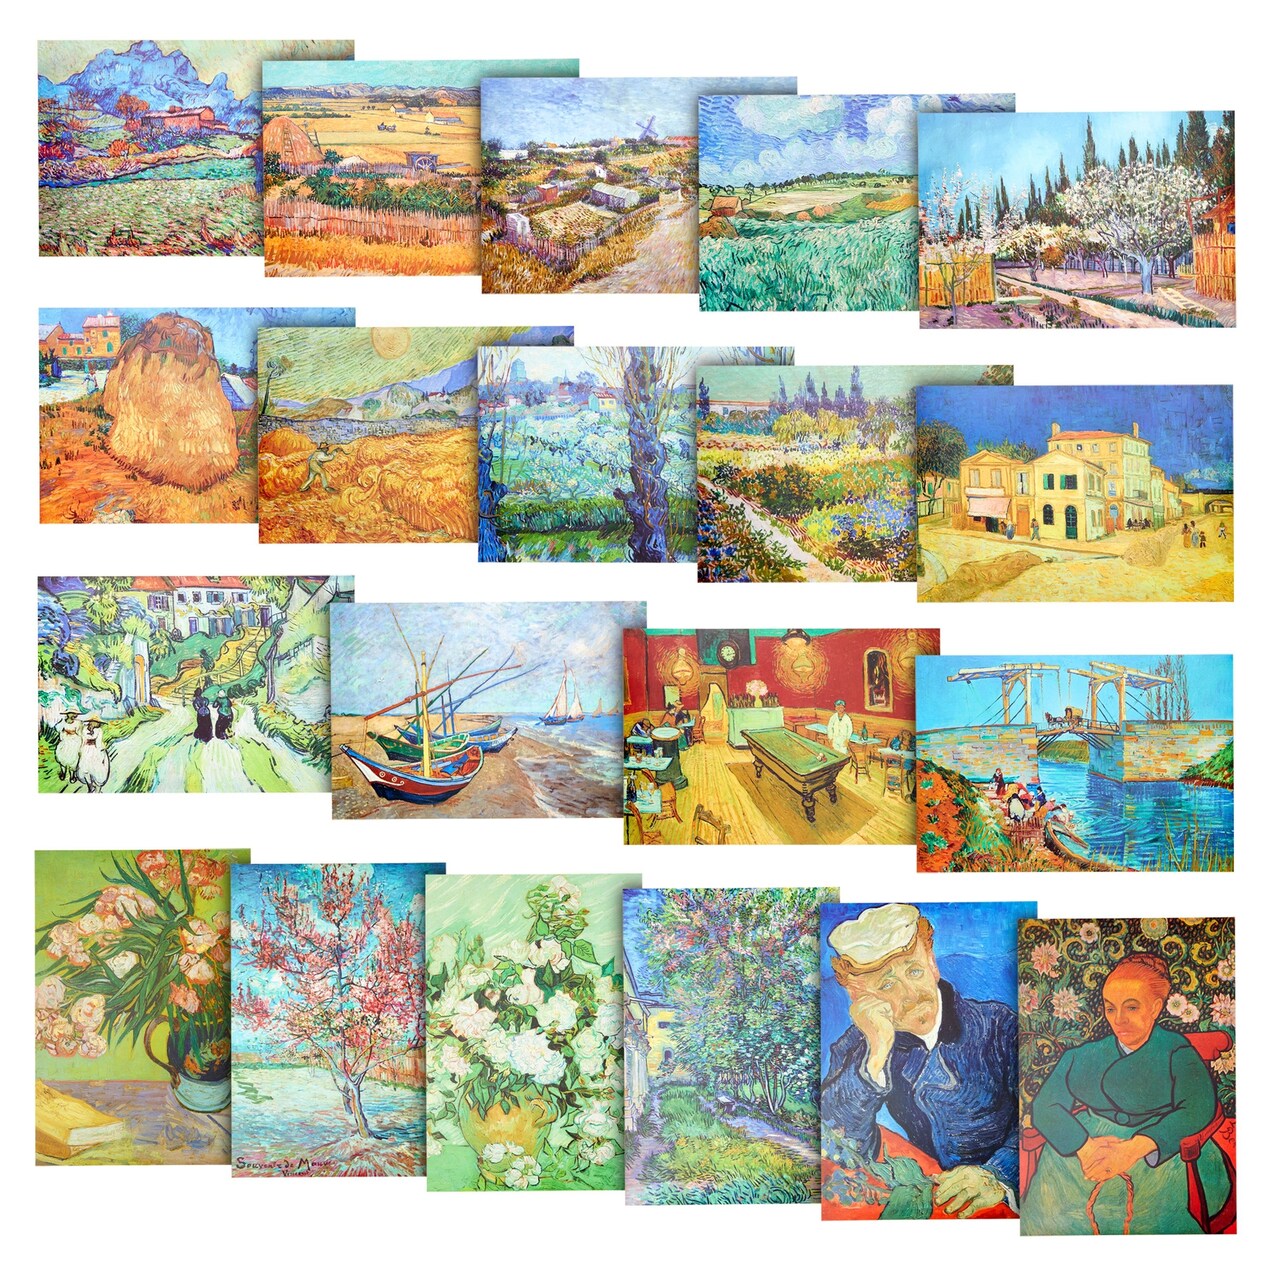 Set of 20 Unframed Vincent Van Gogh Wall Art Prints, Fine Art Posters for Gifts, Classroom, Office (13 x 19 In)